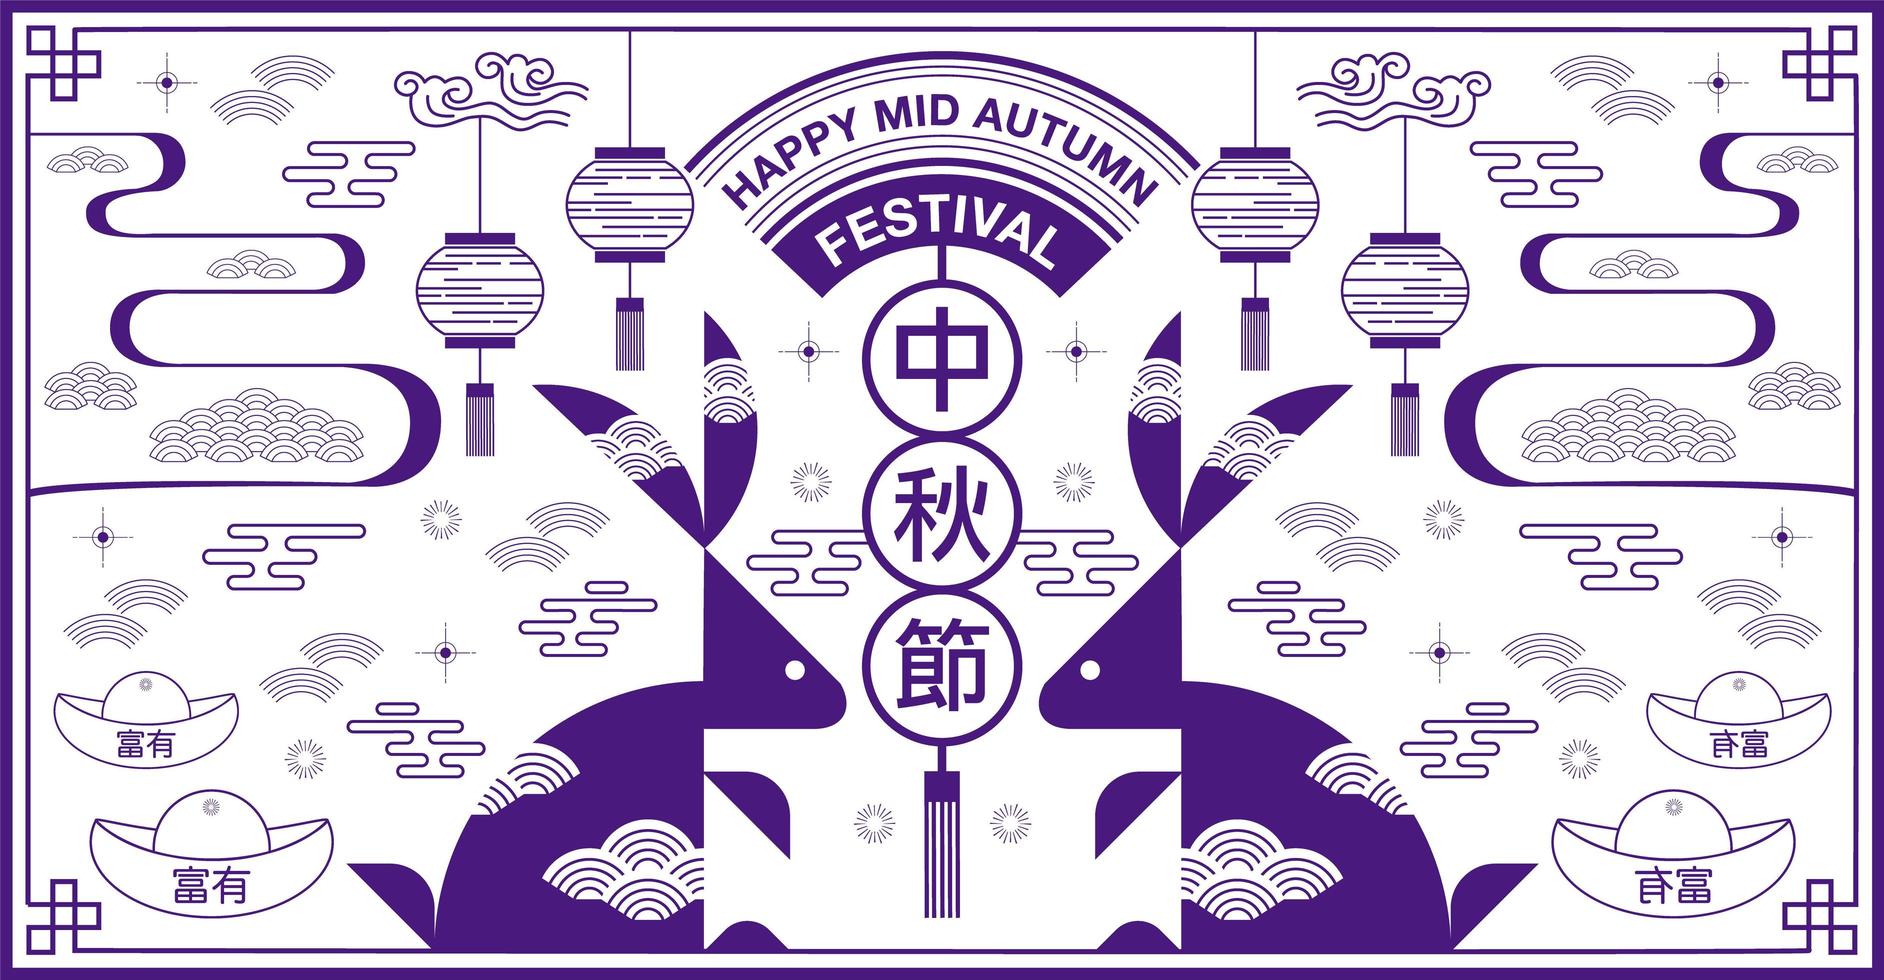 Happy Mid autumn festival poster with purple rabbits vector